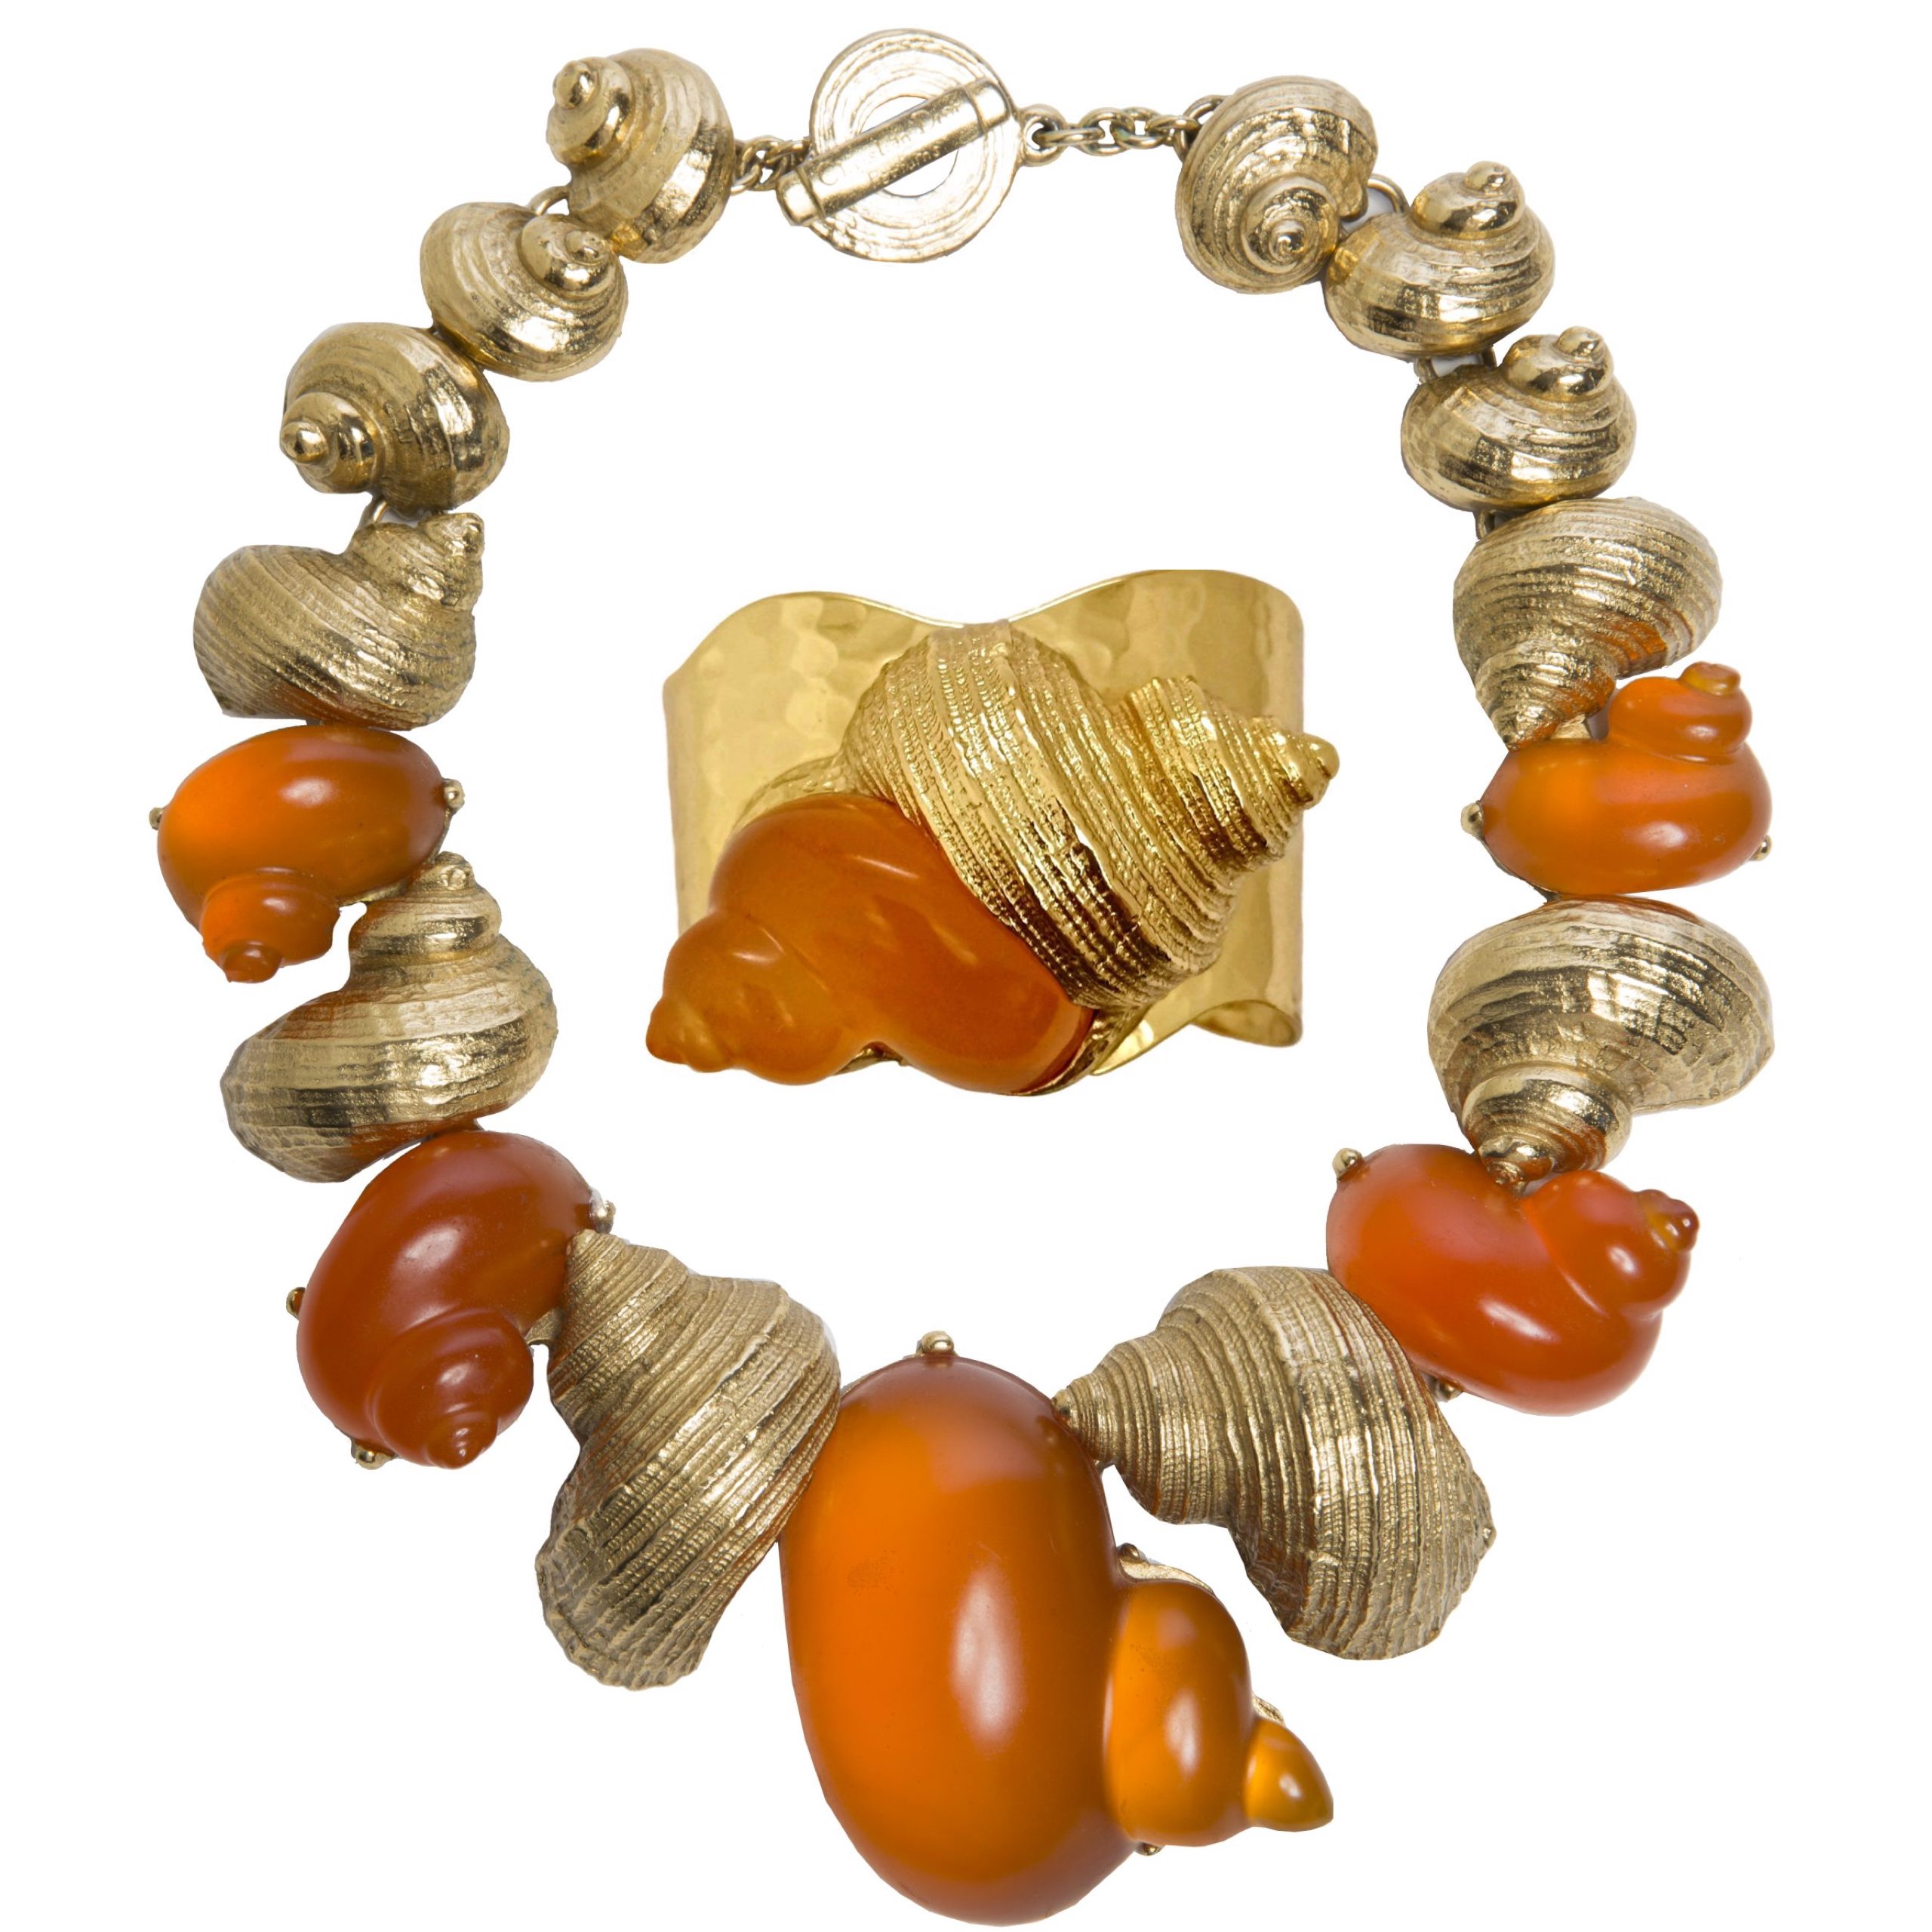 Vintage resin seashell set with cuff